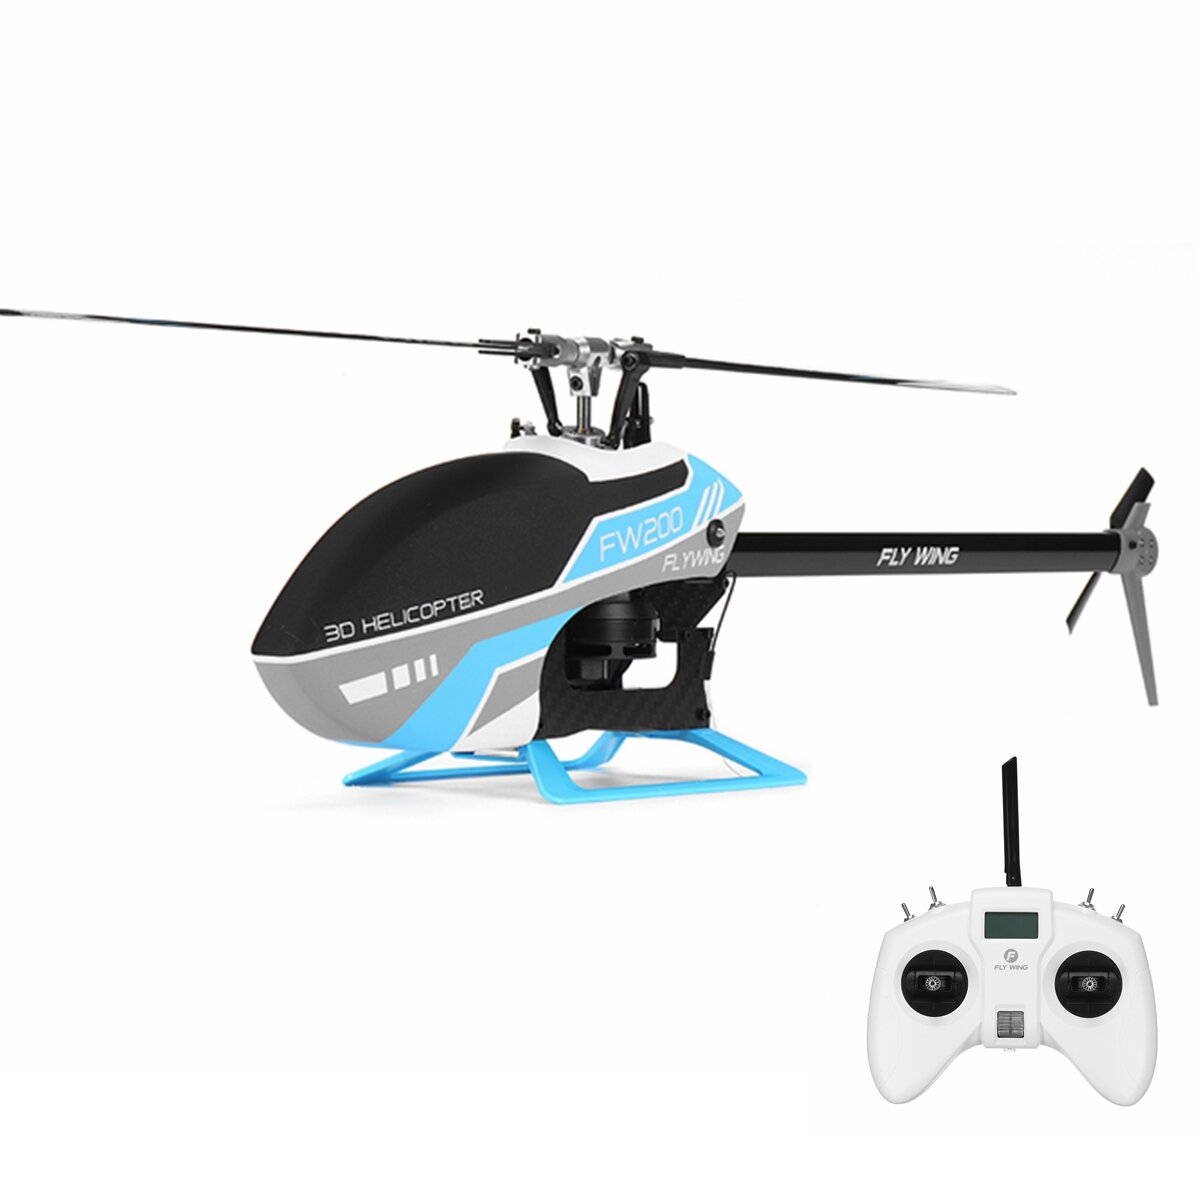 Image of FLY WING FW200 6CH 3D Acrobatics GPS Altitude Hold One-key Return APP Adjust RC Helicopter RTF With H1 V2 Flight Control